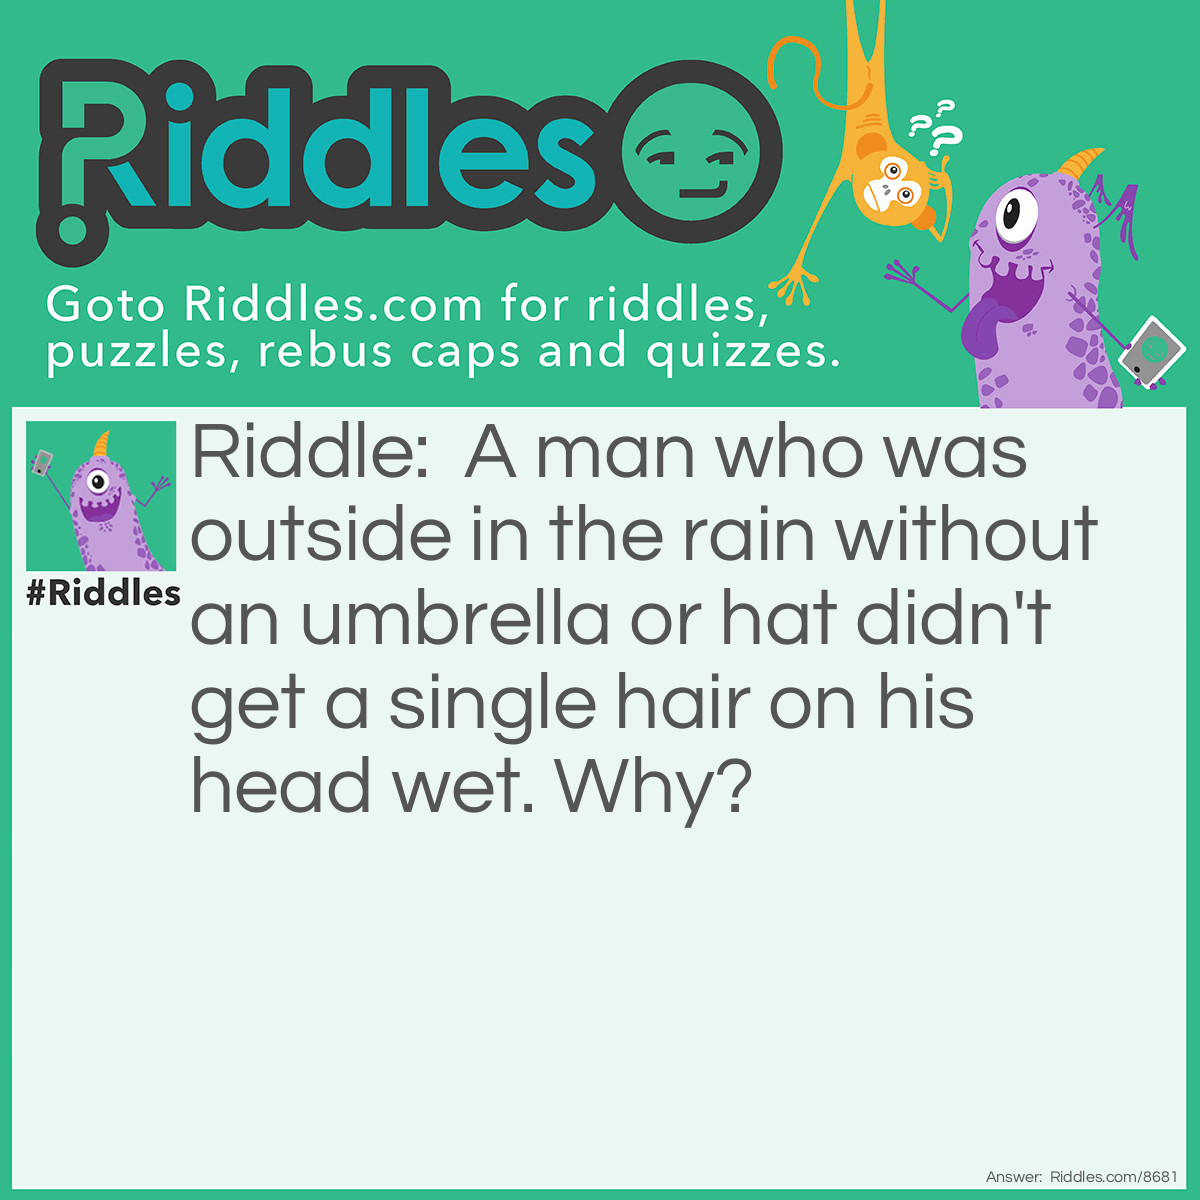 Riddle: A man who was outside in the rain without an umbrella or hat didn't get a single hair on his head wet. Why? Answer: He was bald.